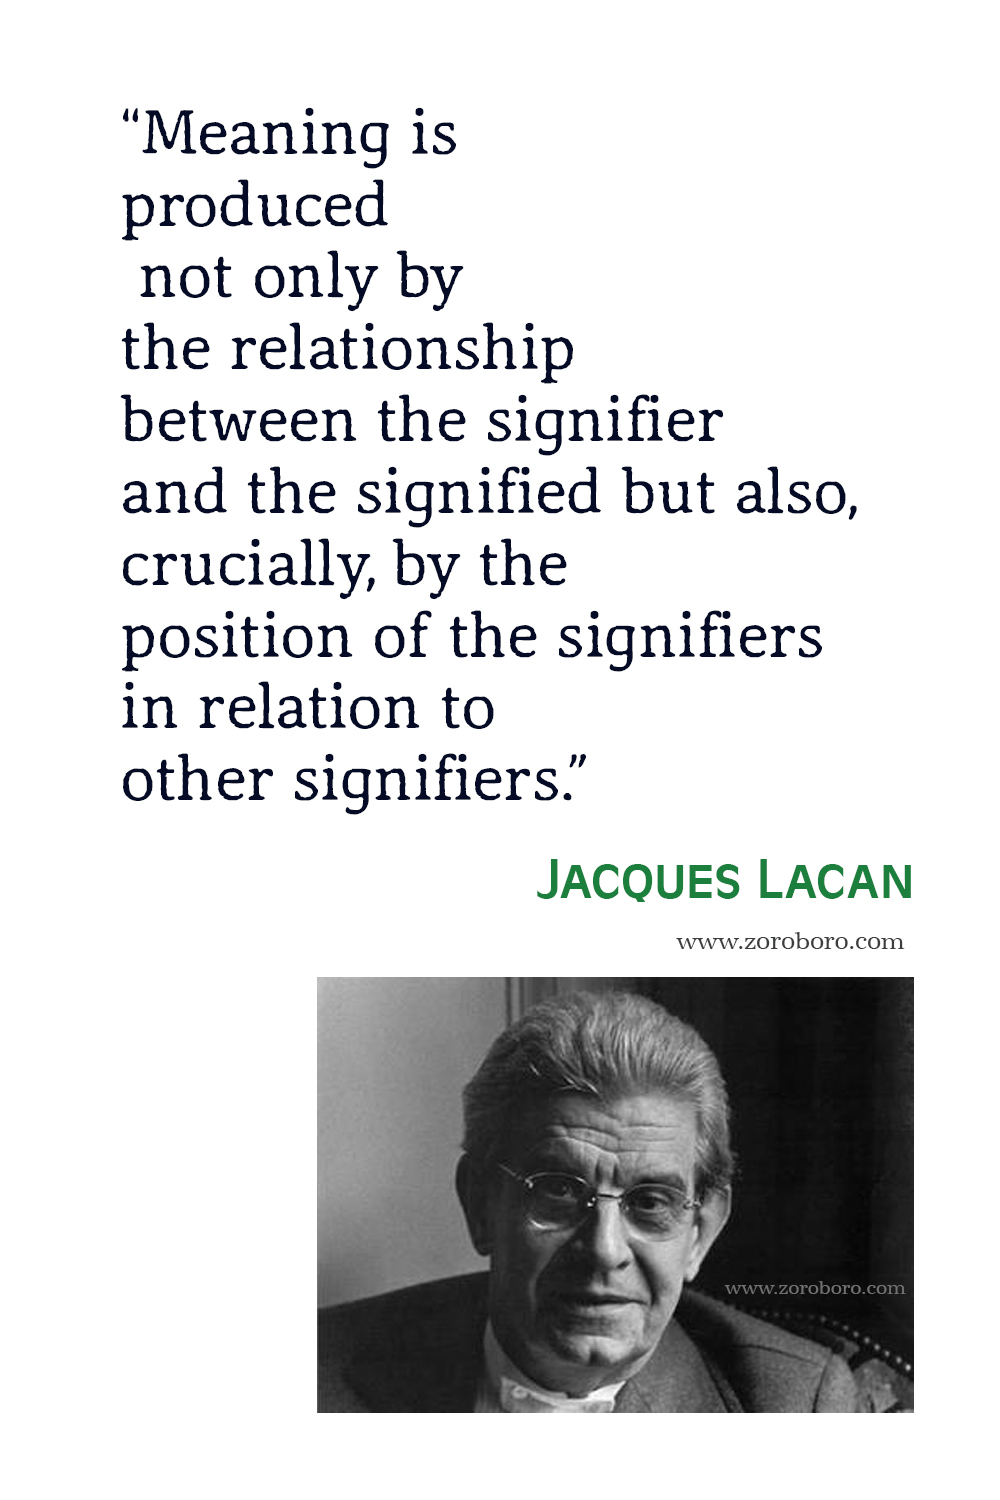 Jacques Lacan Quotes, Jacques Lacan Books, Jacques Lacan Poems, Jacques Lacan Poetry, Jacques Lacan Theory, Jacques Lacan .